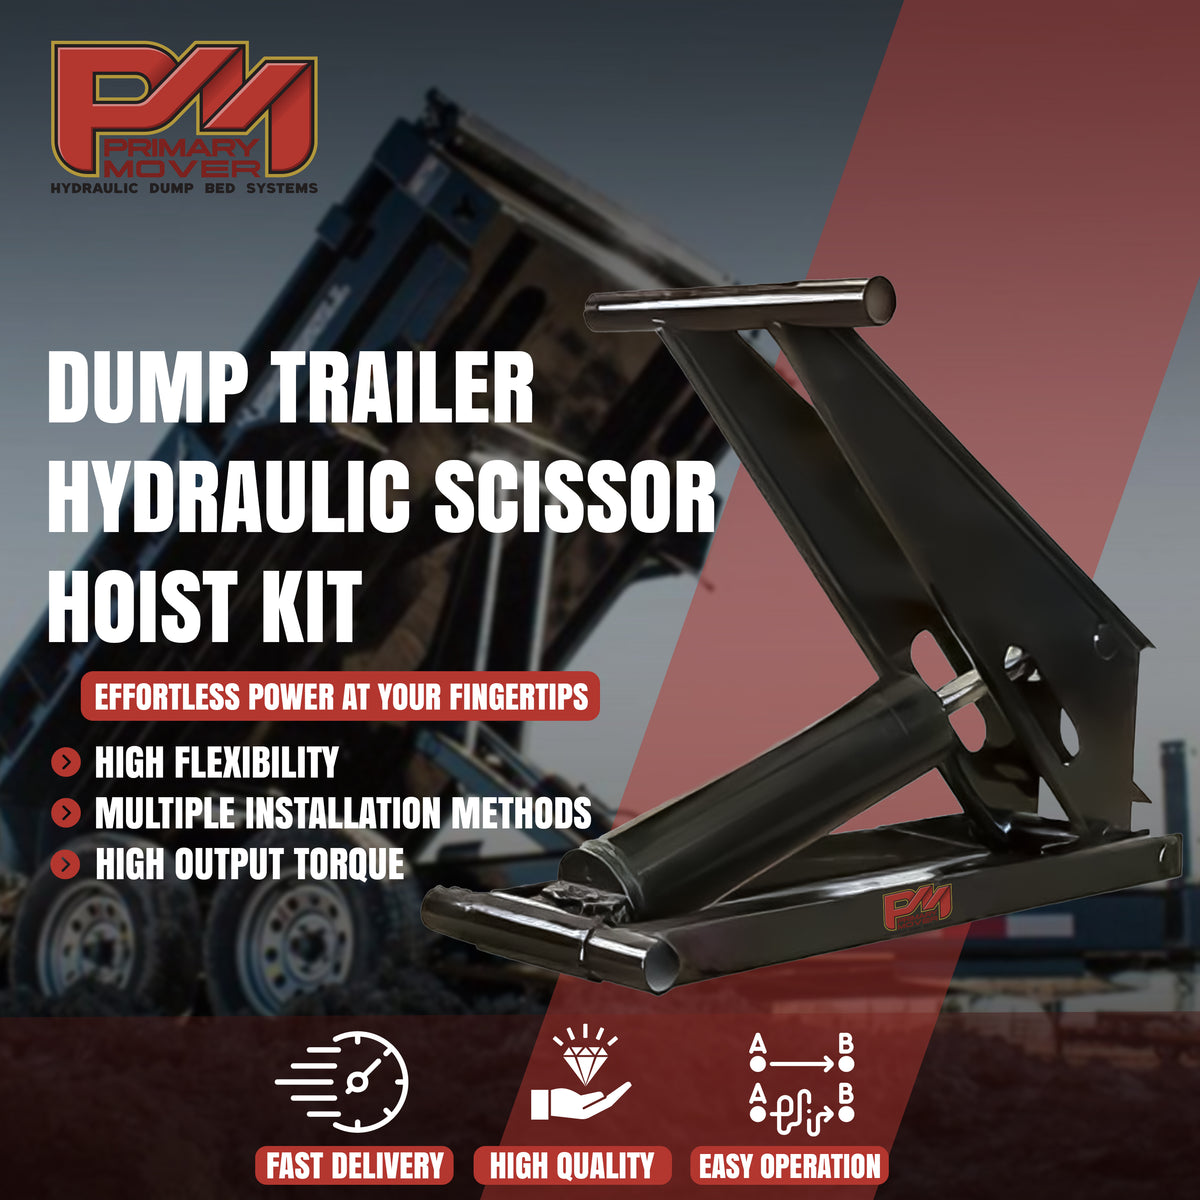 Hydraulic Scissor Hoist Kit - 6 Ton Capacity - Fits 10-14' Dump Body | PF-416: Black metal lifter with text, red and white accents, 3-year warranty, perfect for dump trailers or utility truck beds.